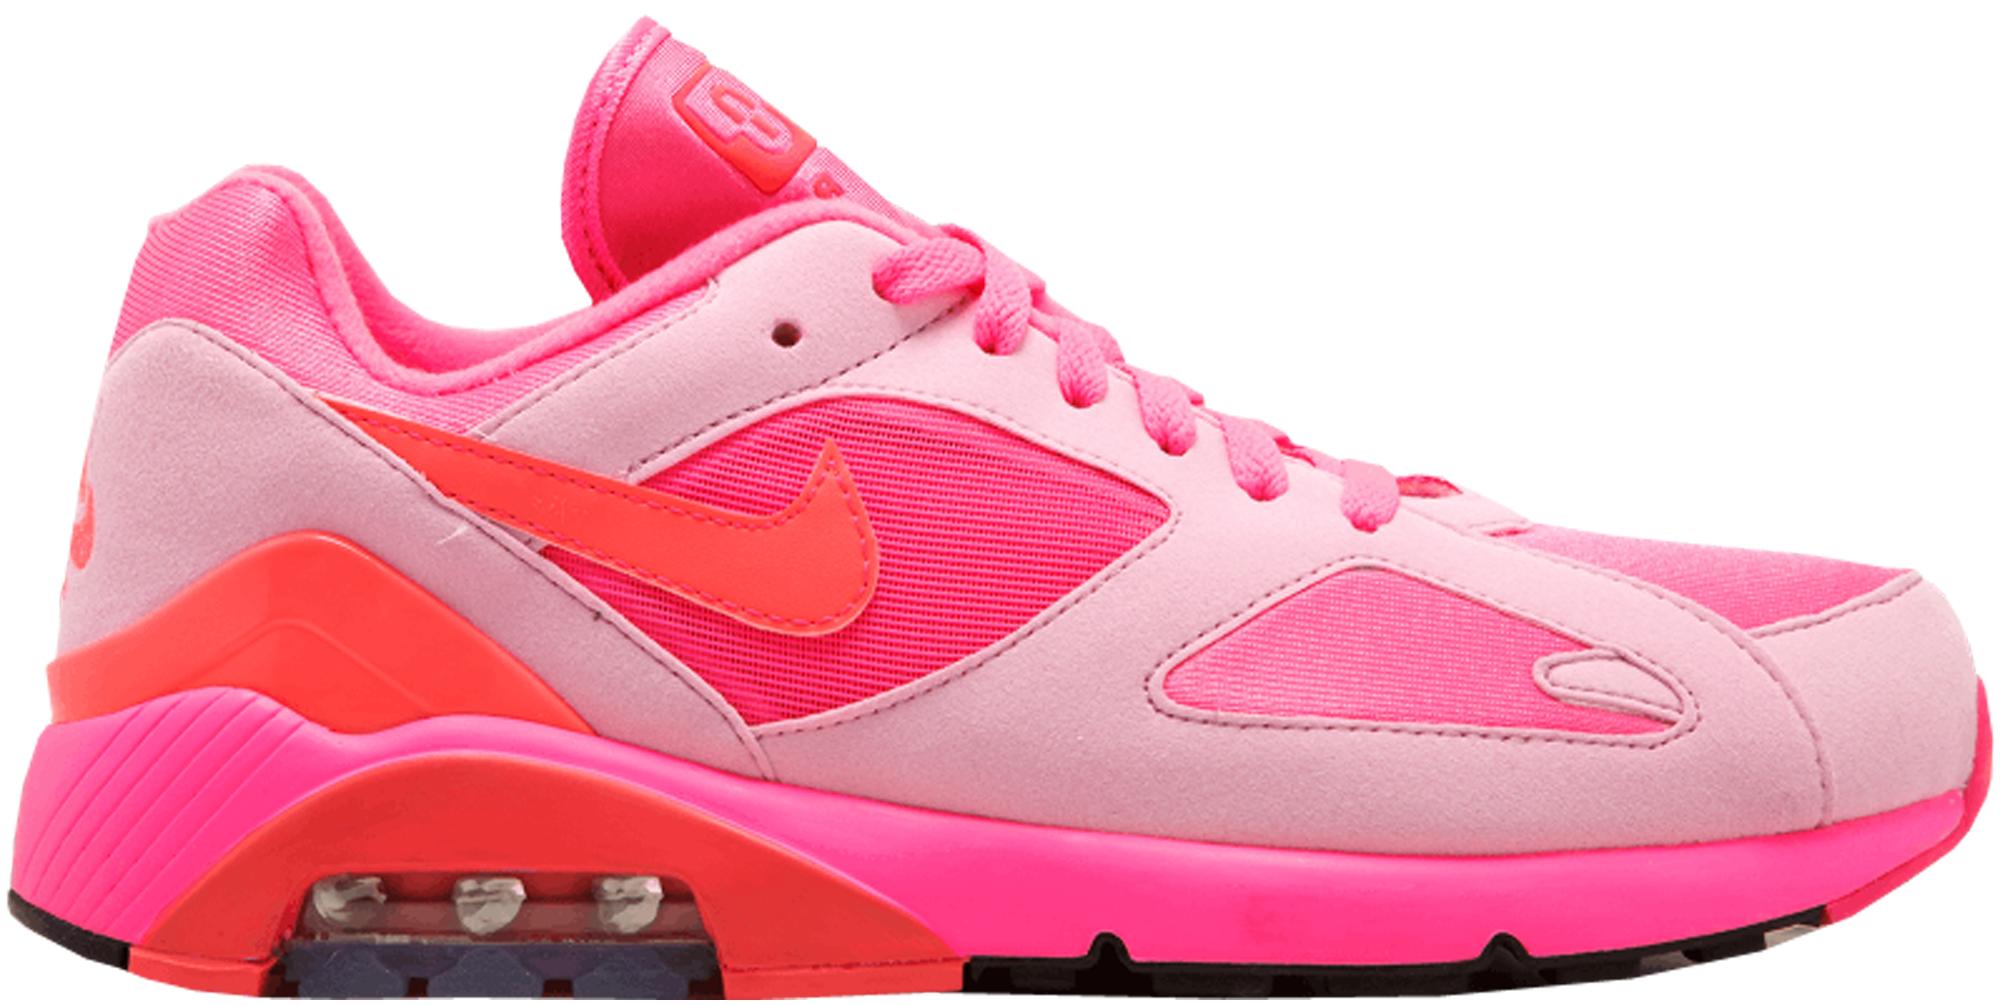 Comme des Garcons x Nike Air Max 180 Pink